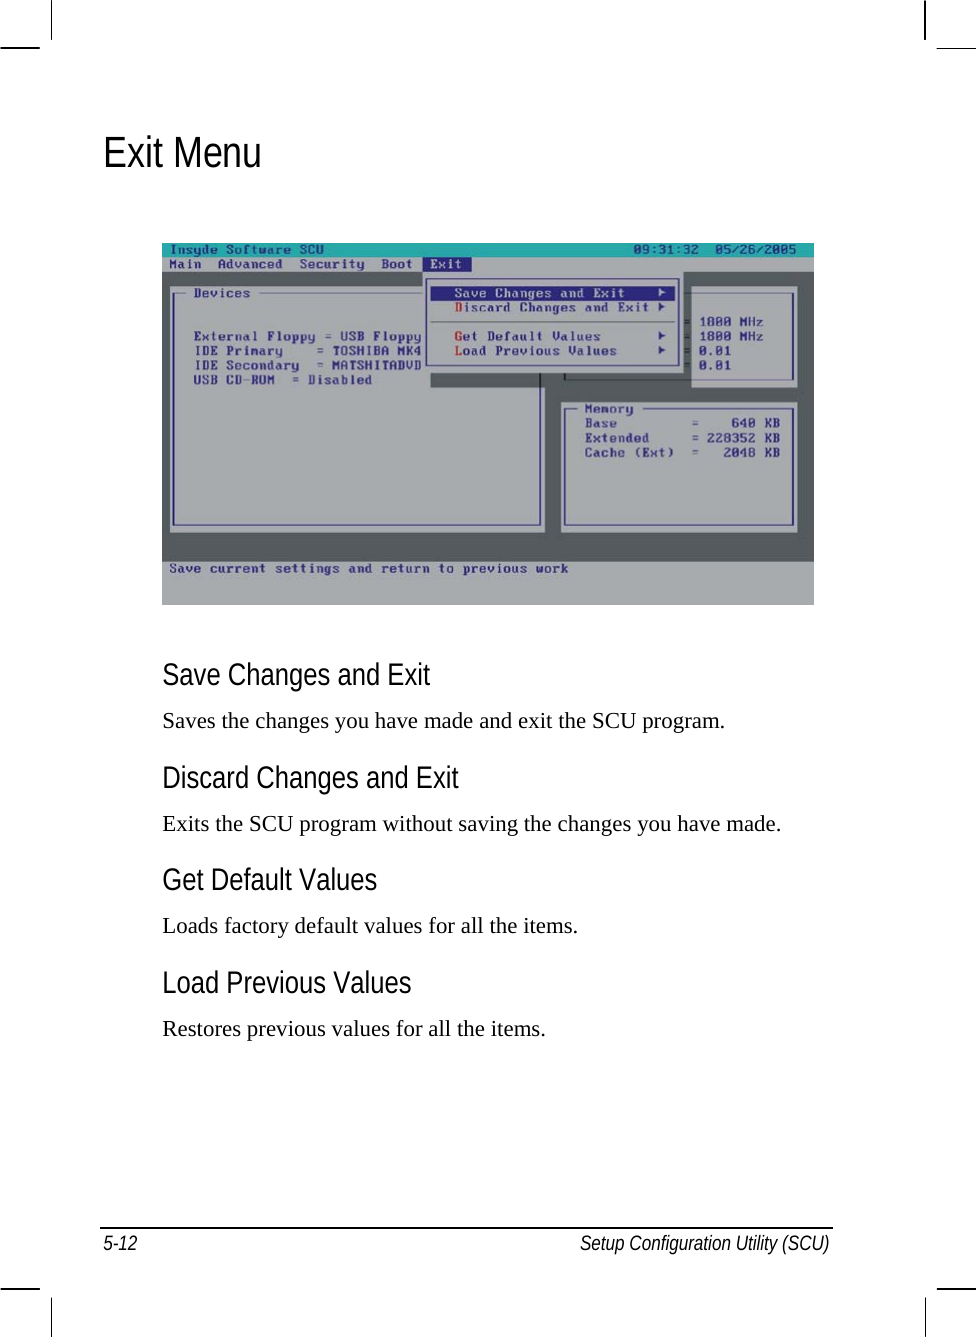  Exit Menu  Save Changes and Exit Saves the changes you have made and exit the SCU program. Discard Changes and Exit Exits the SCU program without saving the changes you have made. Get Default Values Loads factory default values for all the items. Load Previous Values Restores previous values for all the items.    5-12  Setup Configuration Utility (SCU) 